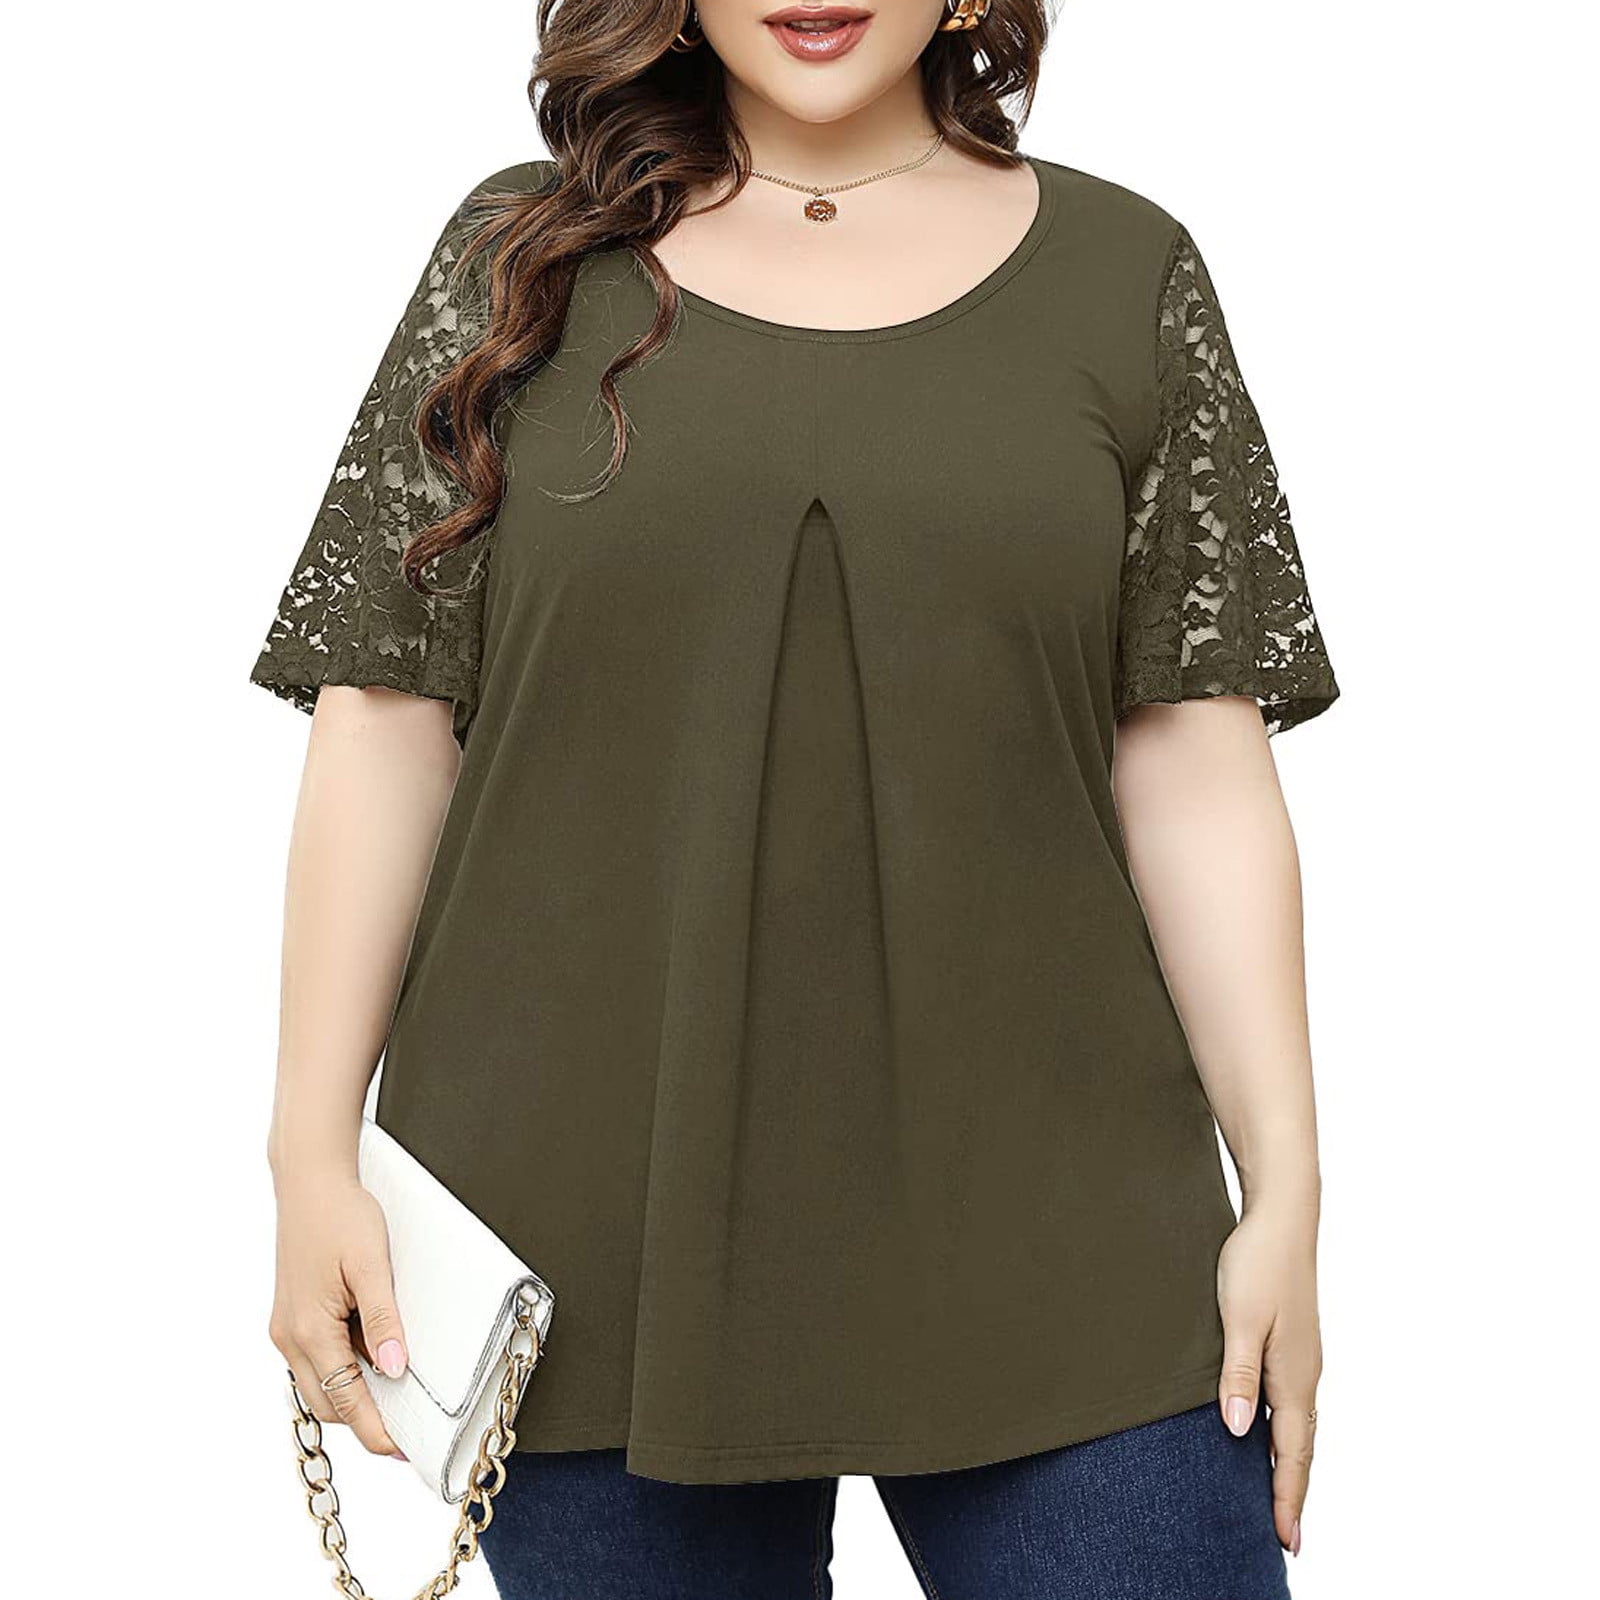 Zanvin Womens Summer Plus Size Tunic Tops,Fashion Woman Causal Round Neck  Solid Blouse Lace Short SleeveT-Shirt Summer Plus Size Tops,Green,XXL,On